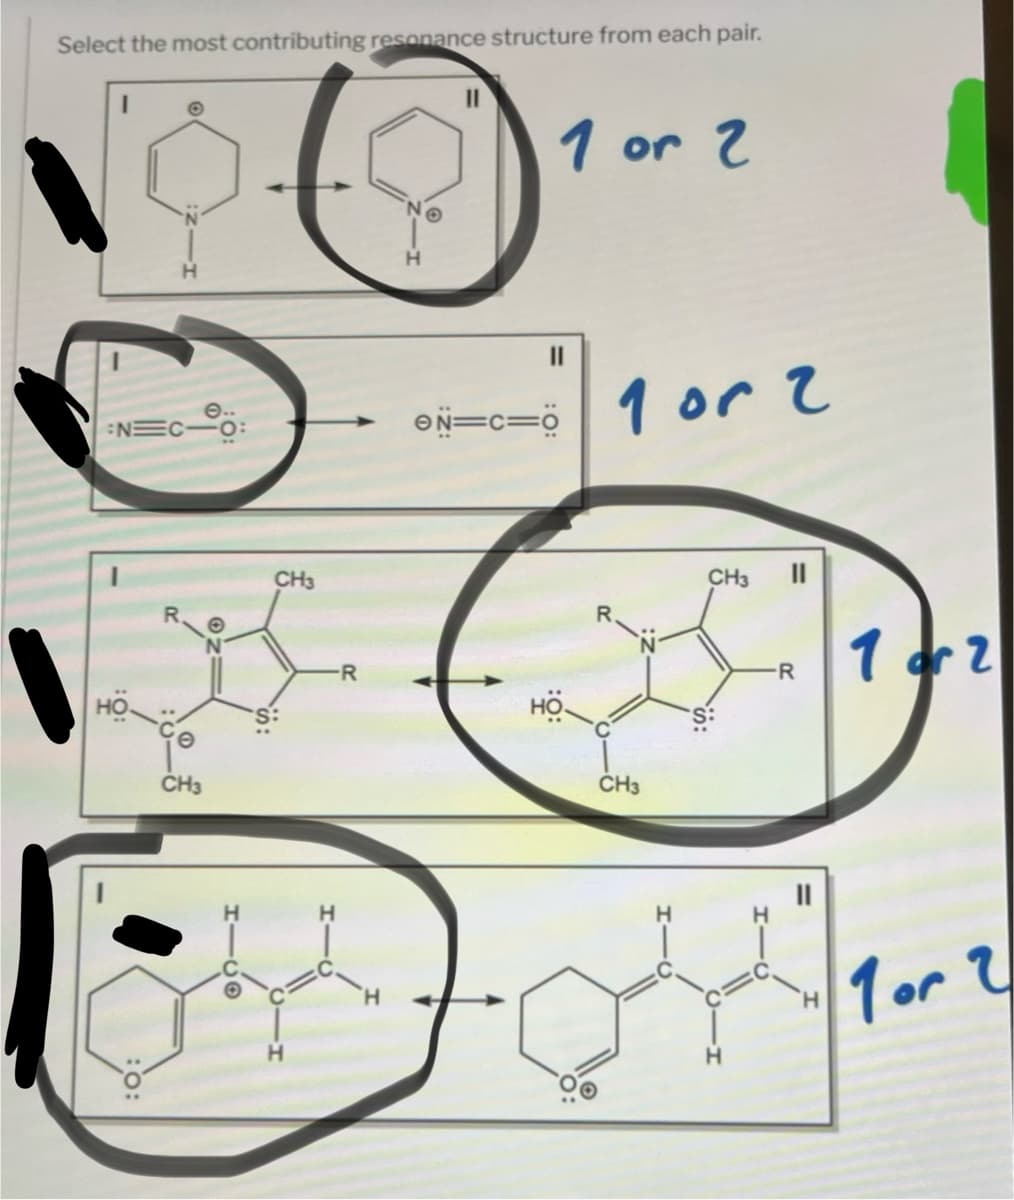 Select the most contributing resonance structure from each pair.
1
:NEC 0:
R
CH3
CH3
H
-R
H
11
1 or 2
||
ON=c=0
1 or 2
CH3
CH3
R
H
1 dr 2
1 or 2